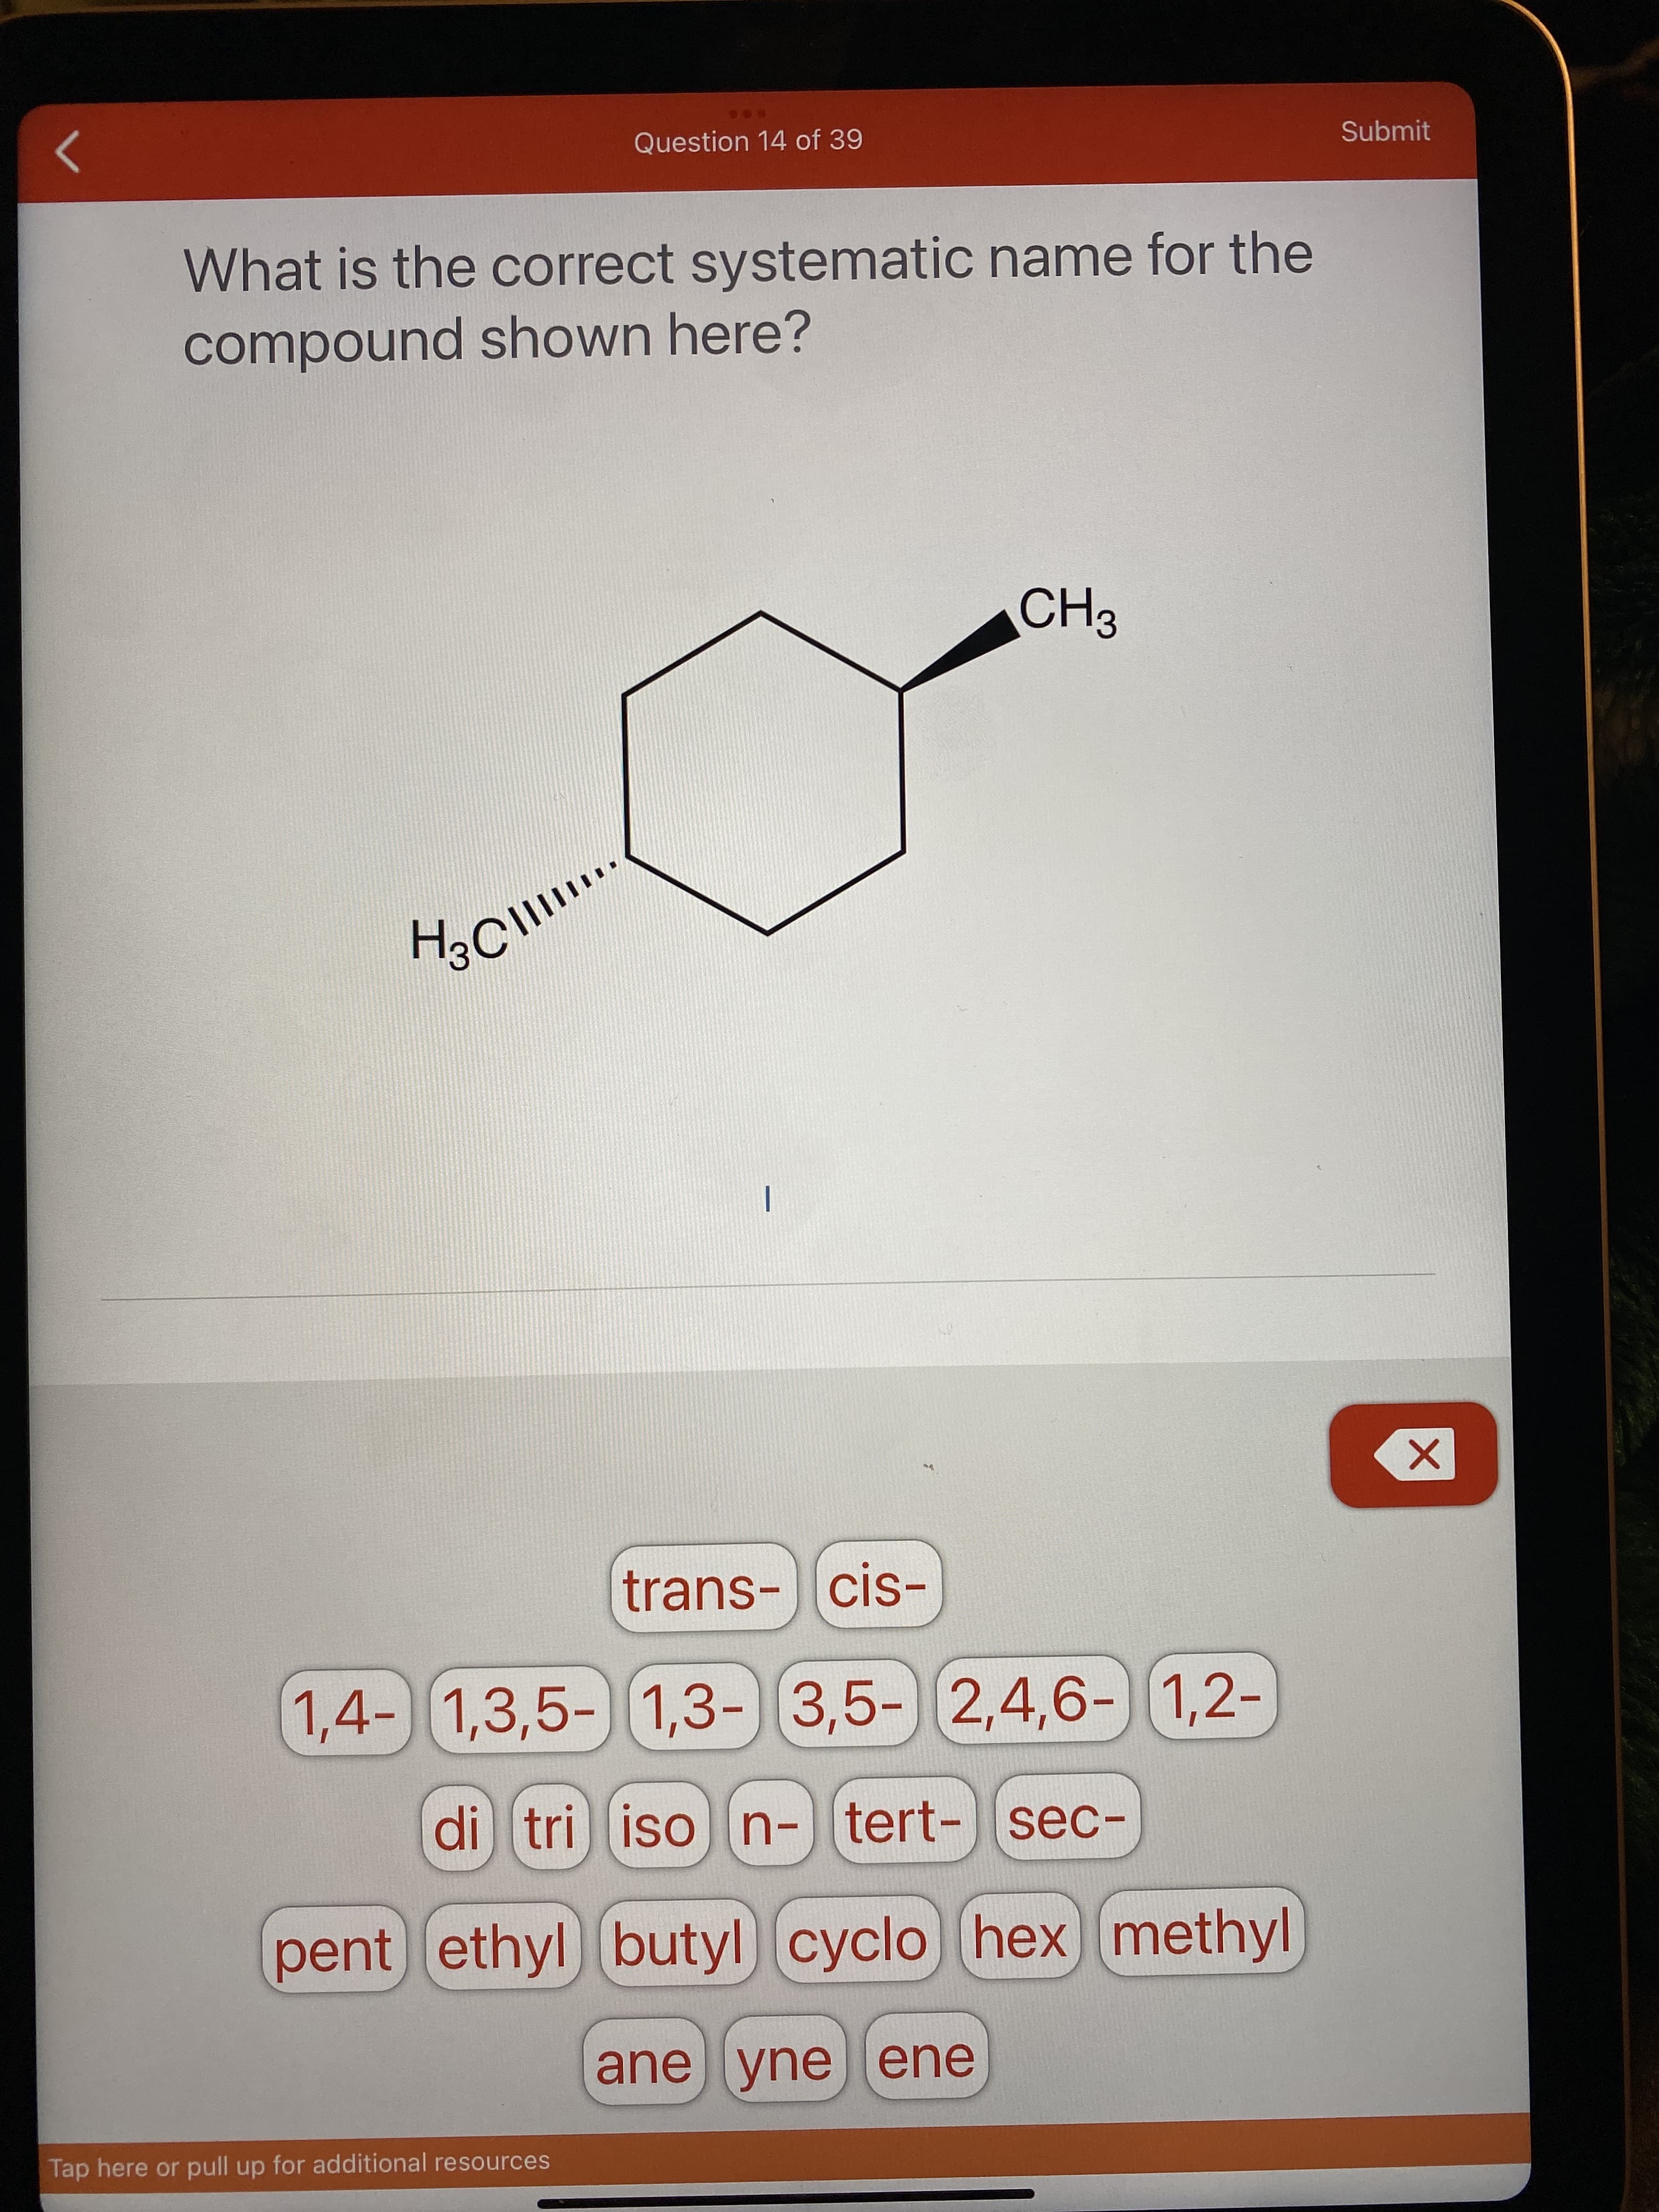 Question 14 of 39
Submit
What is the correct systematic name for the
compound shown here?
trans-cis-
1,4-) 1,3,5-) ) 1,2-
1,3- 3,5- 2,4,6-
di tri ison-tert-sec-
pent ethyl butyl) cyclo hex methyl
ane yneene
Tap here or pull up for additional resources
